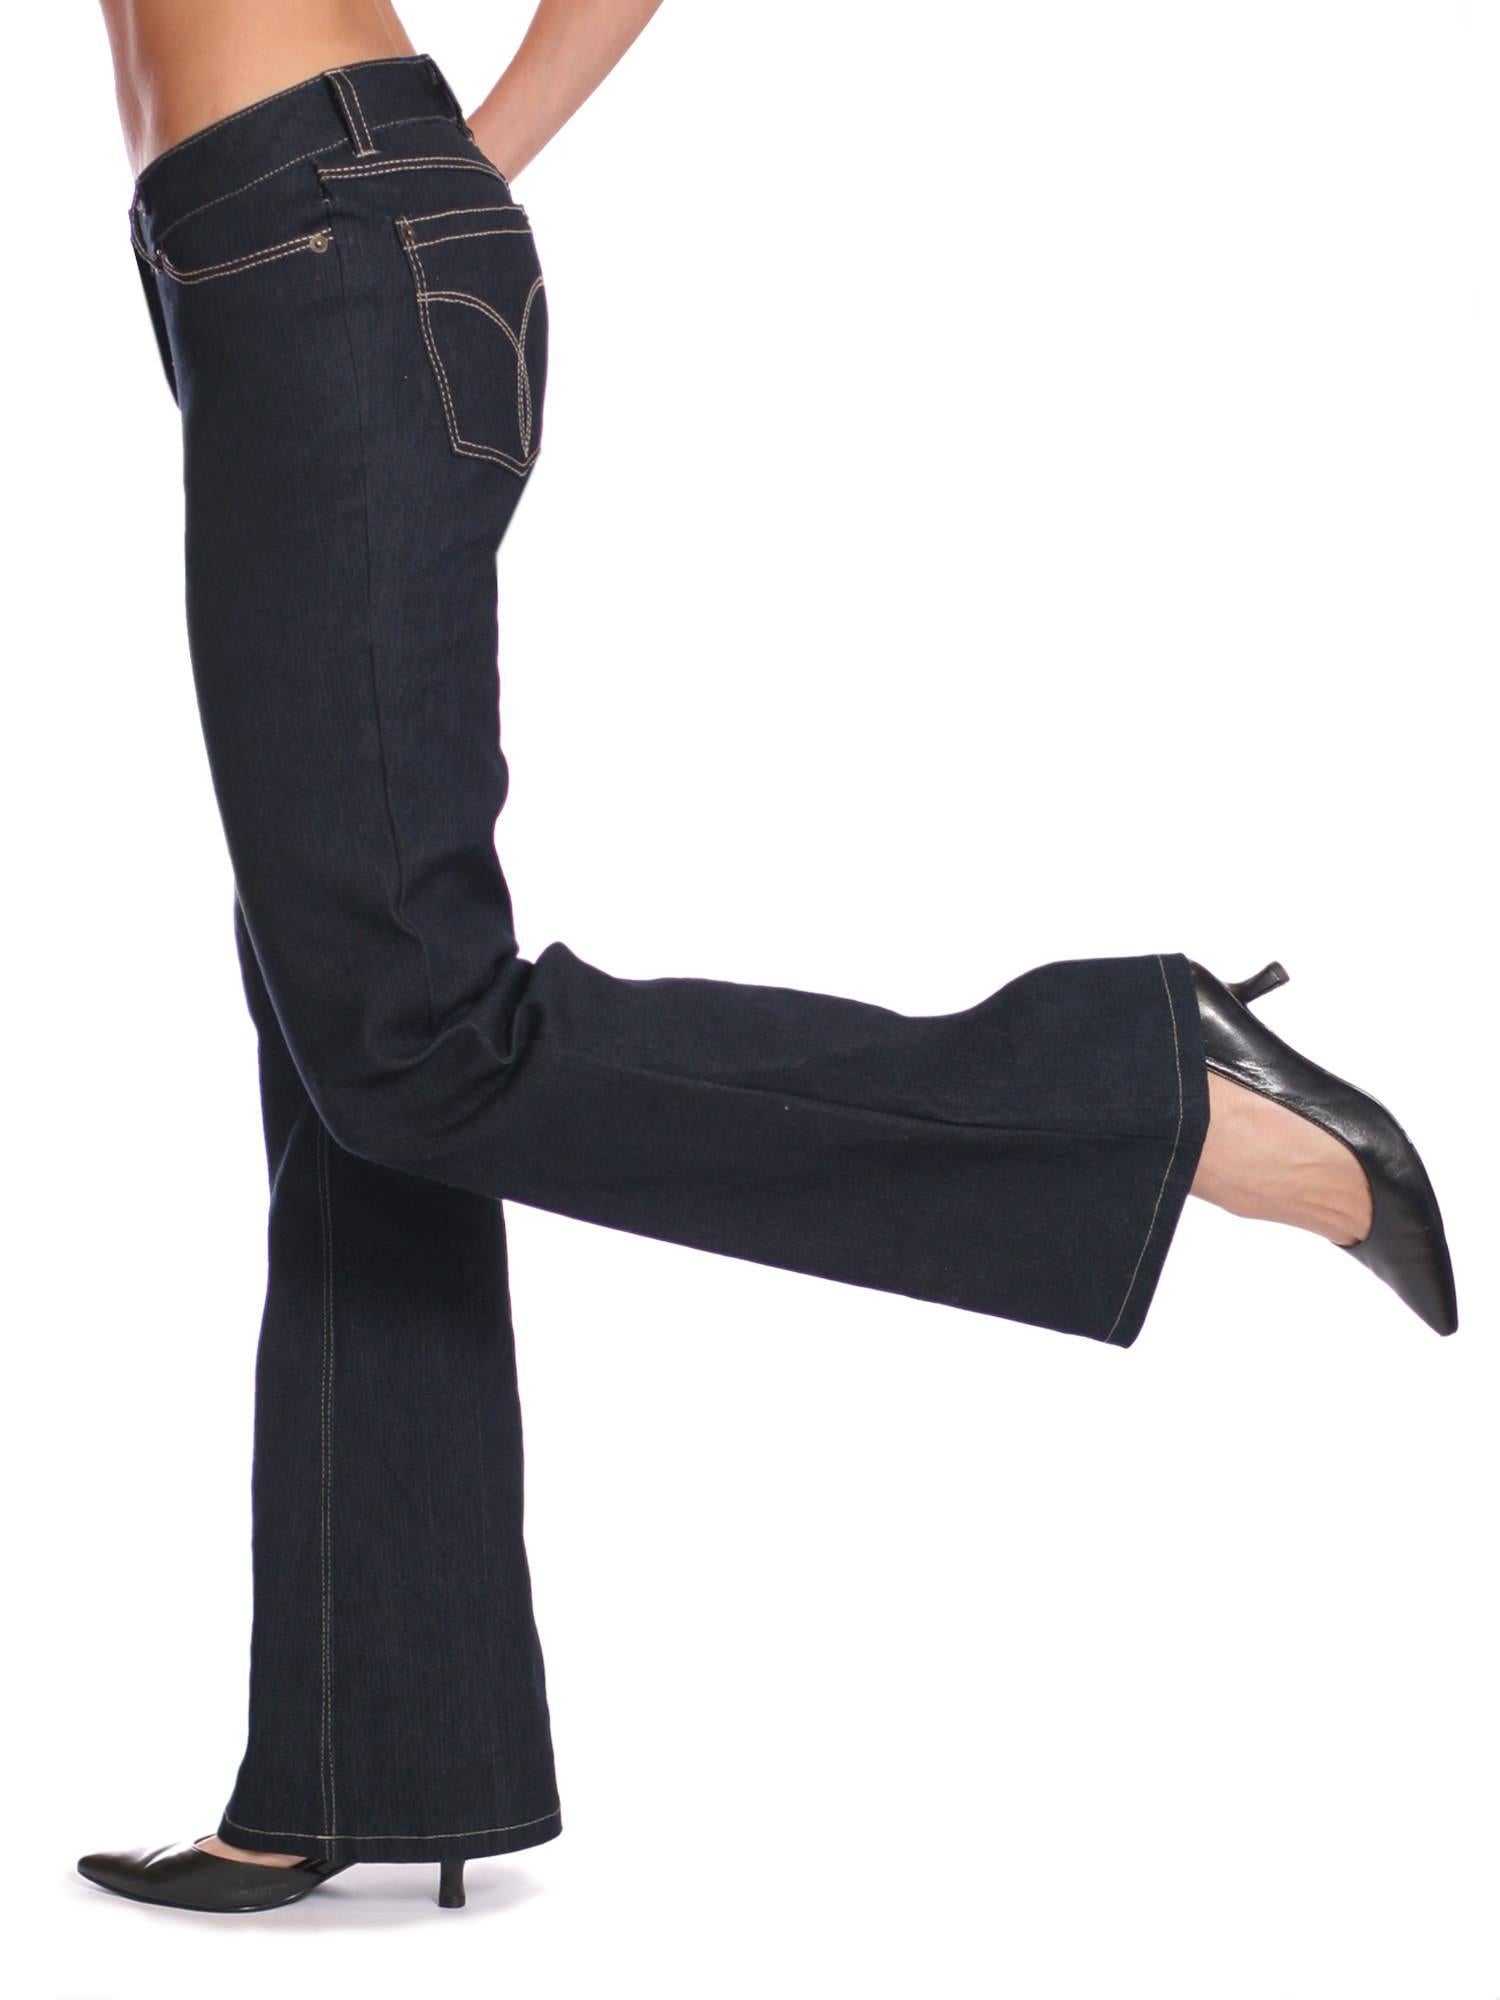 Jalie 2908 - Low-Rise Stretch Bootcut Jeans Pattern 